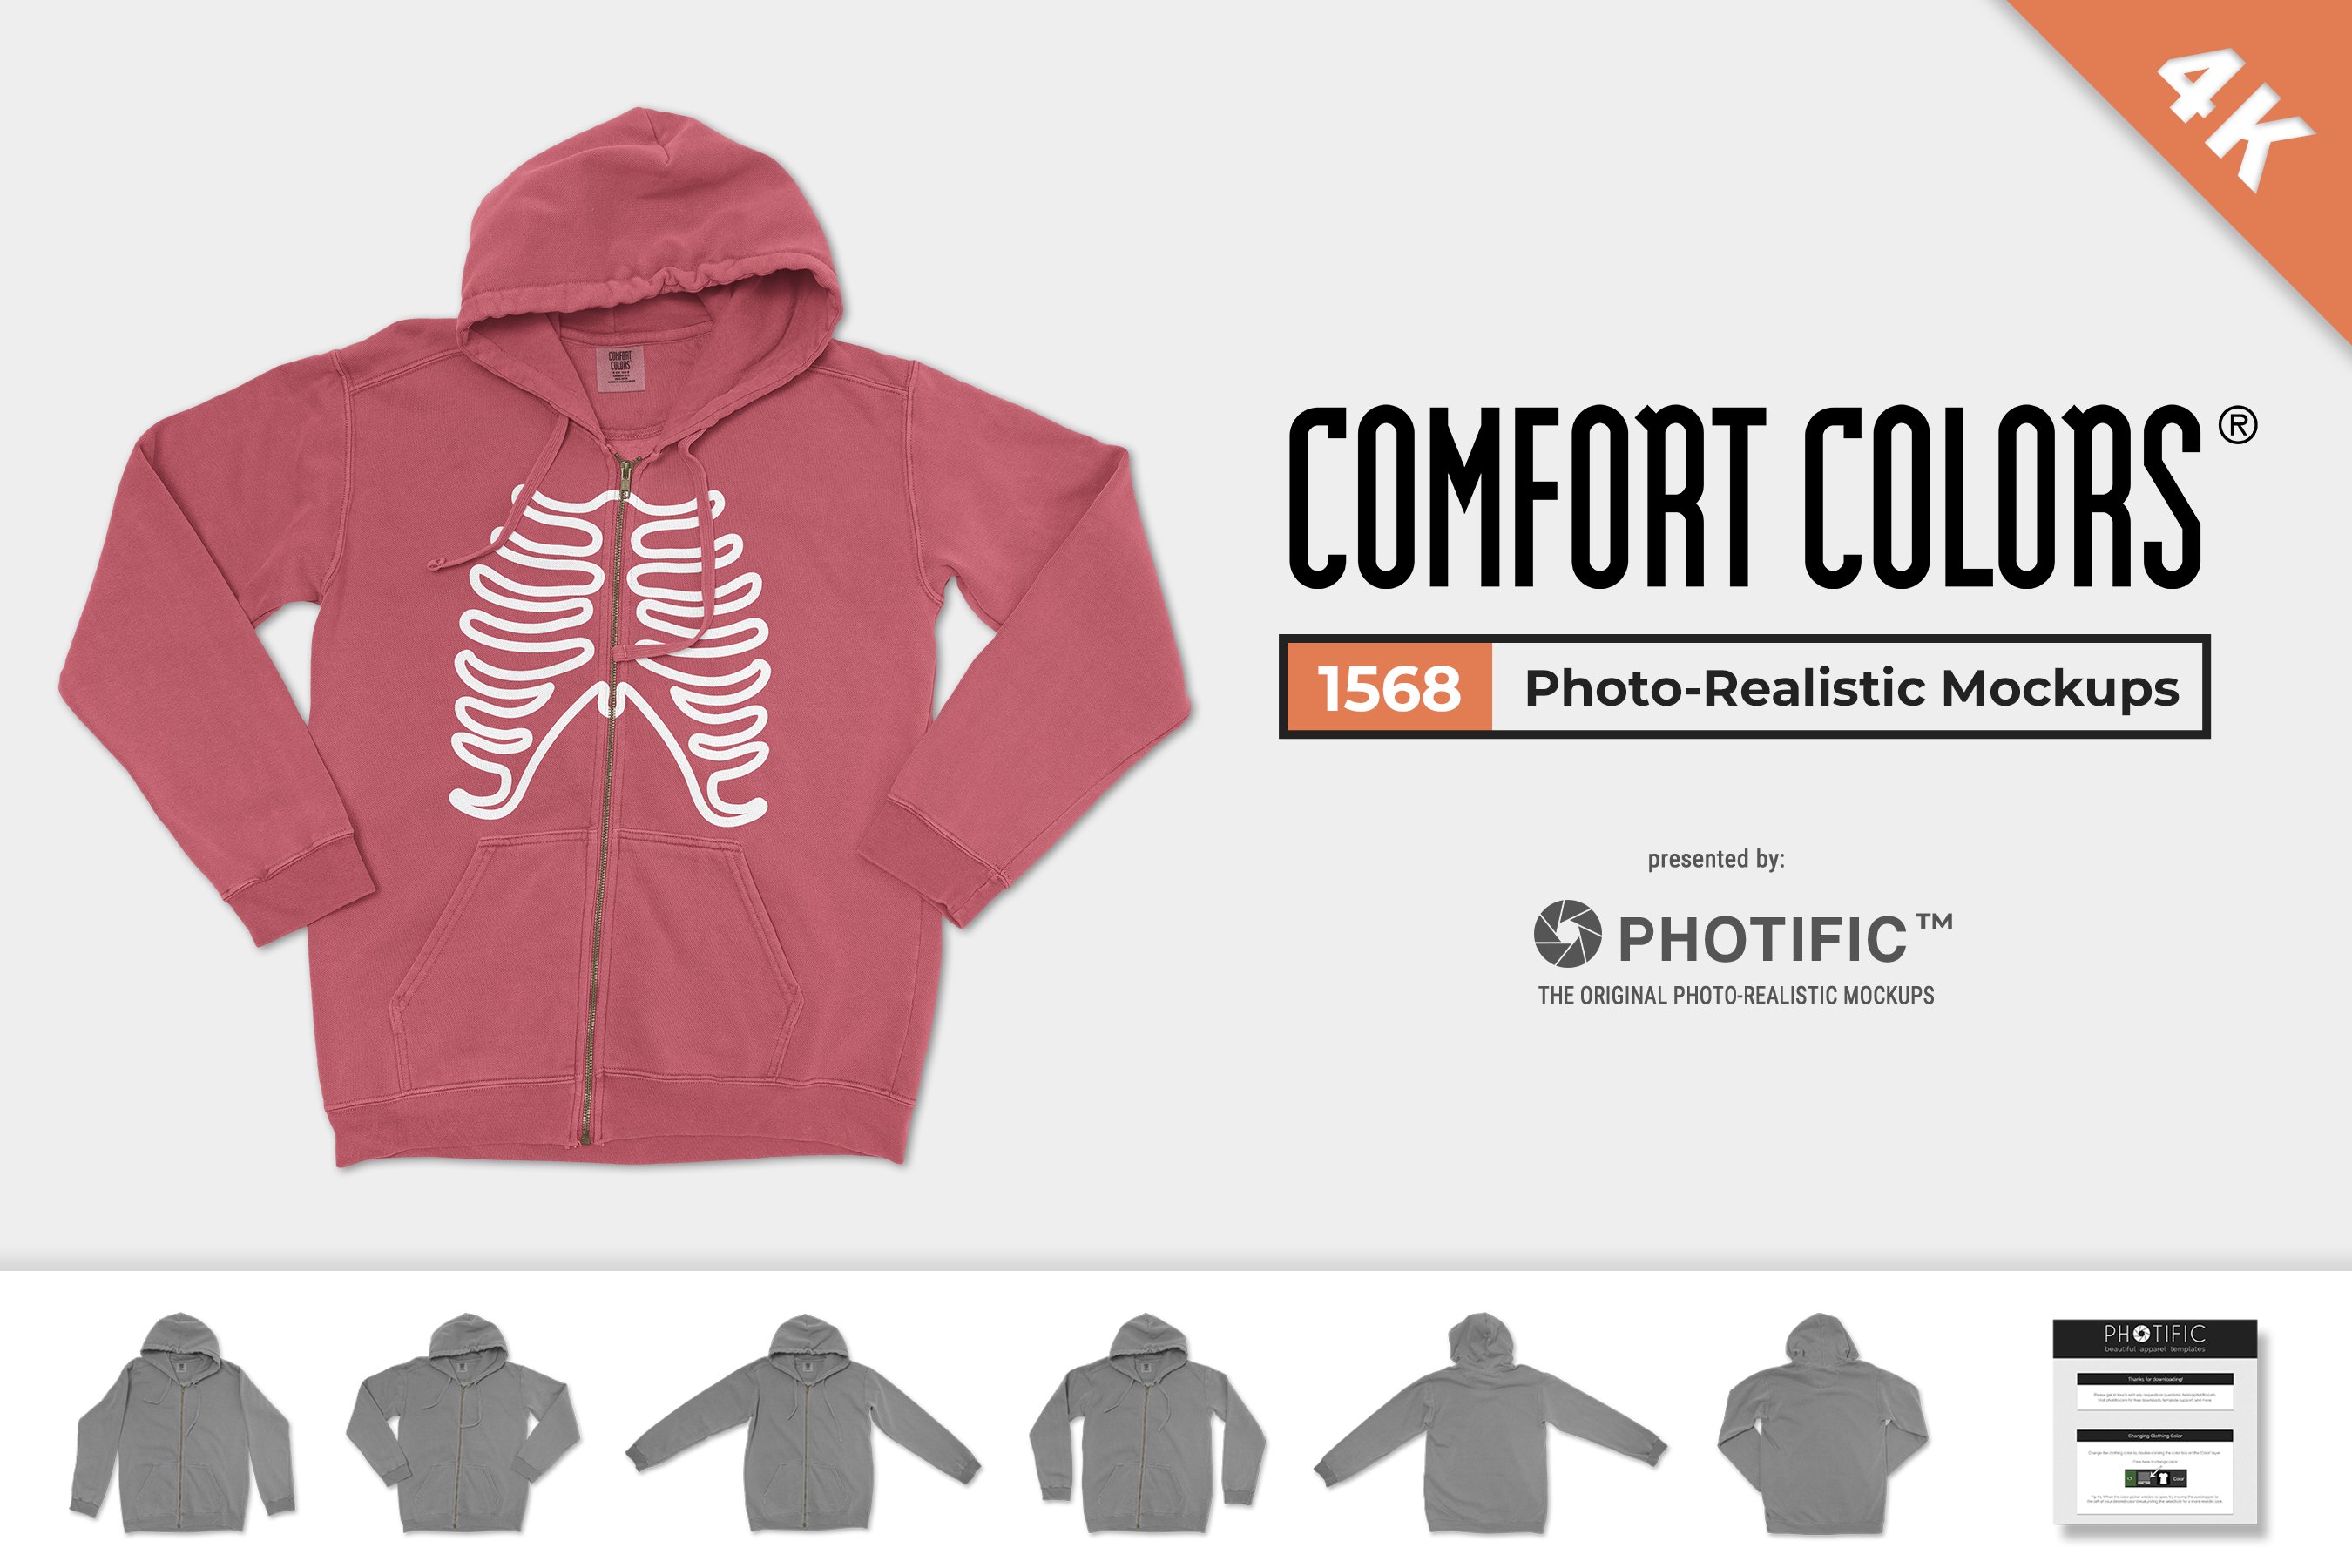 Comfort Colors 1568 Mockups cover image.